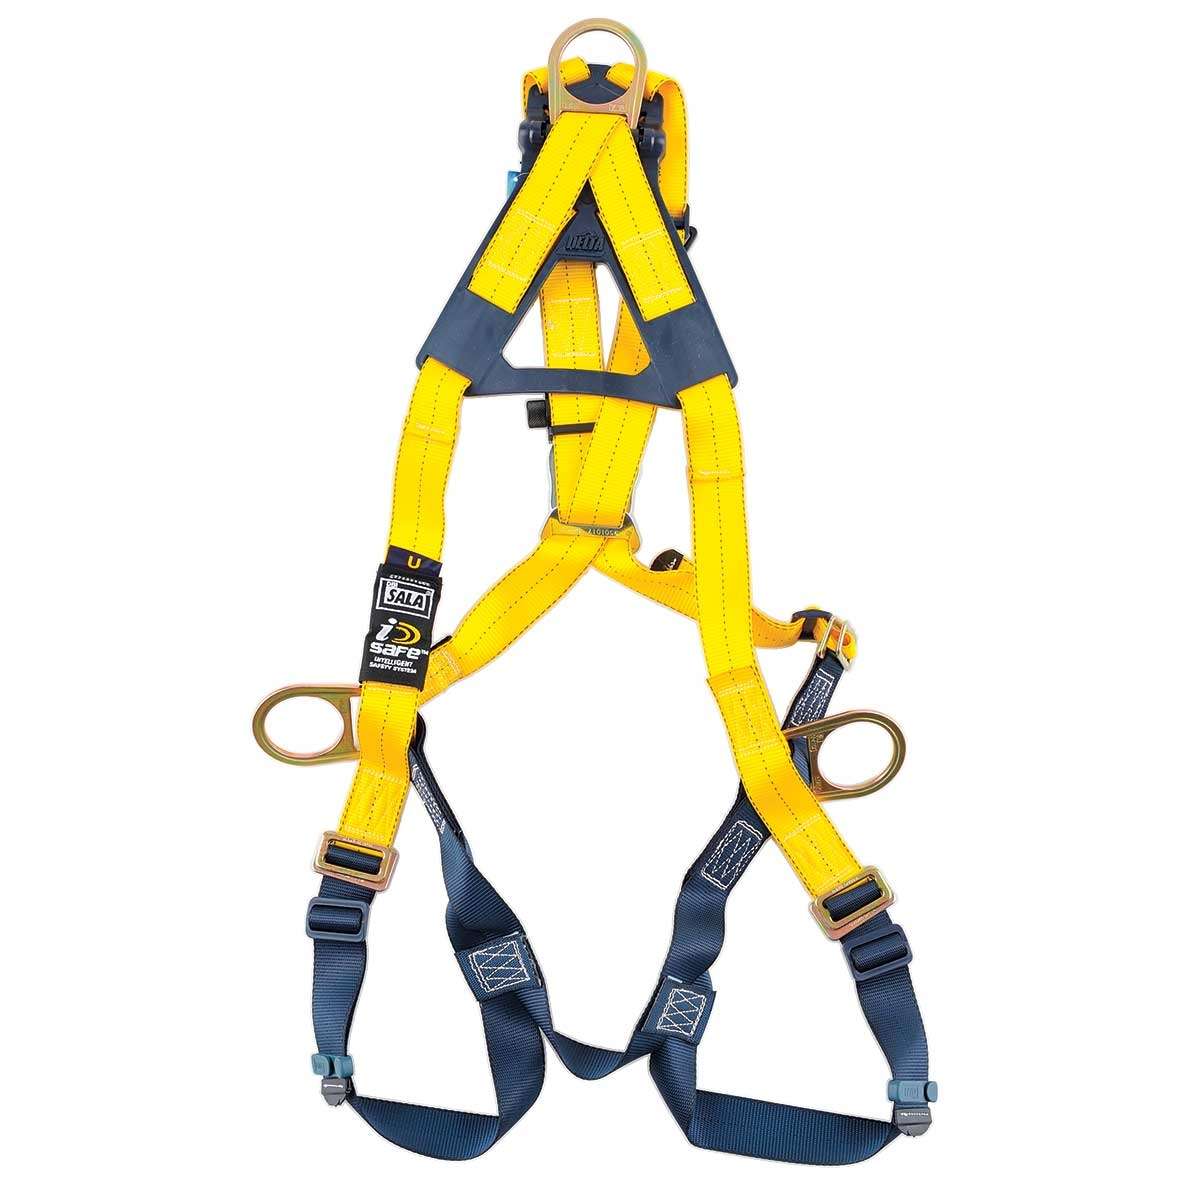 Full Body Harness (Purchase only)